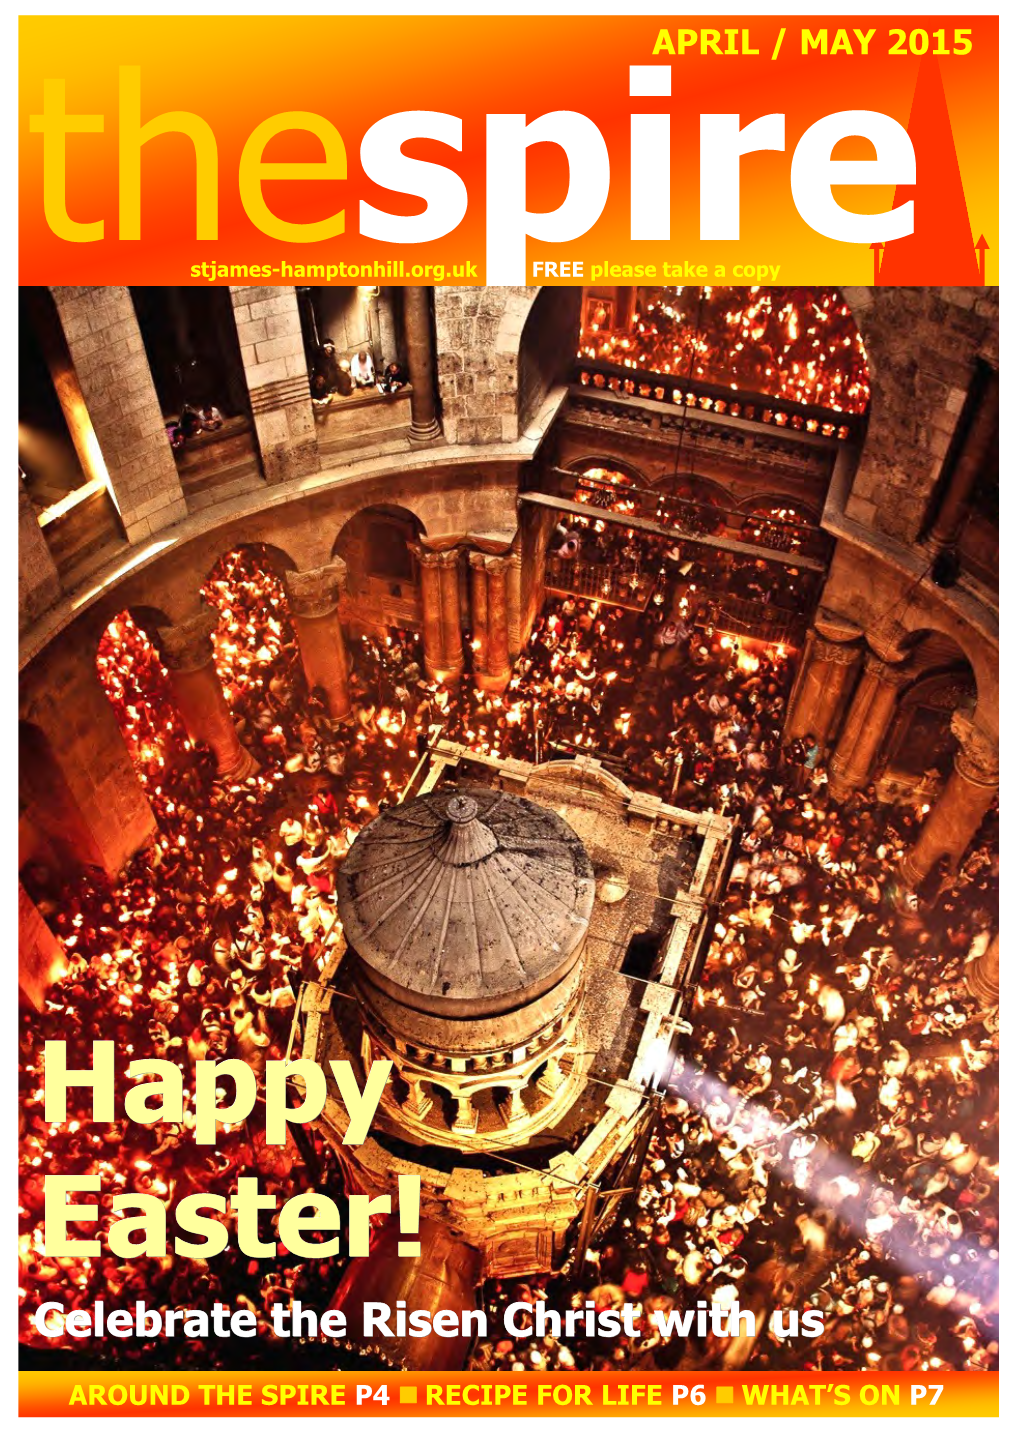 Happy Easter! Celebrate the Risen Christ with Us